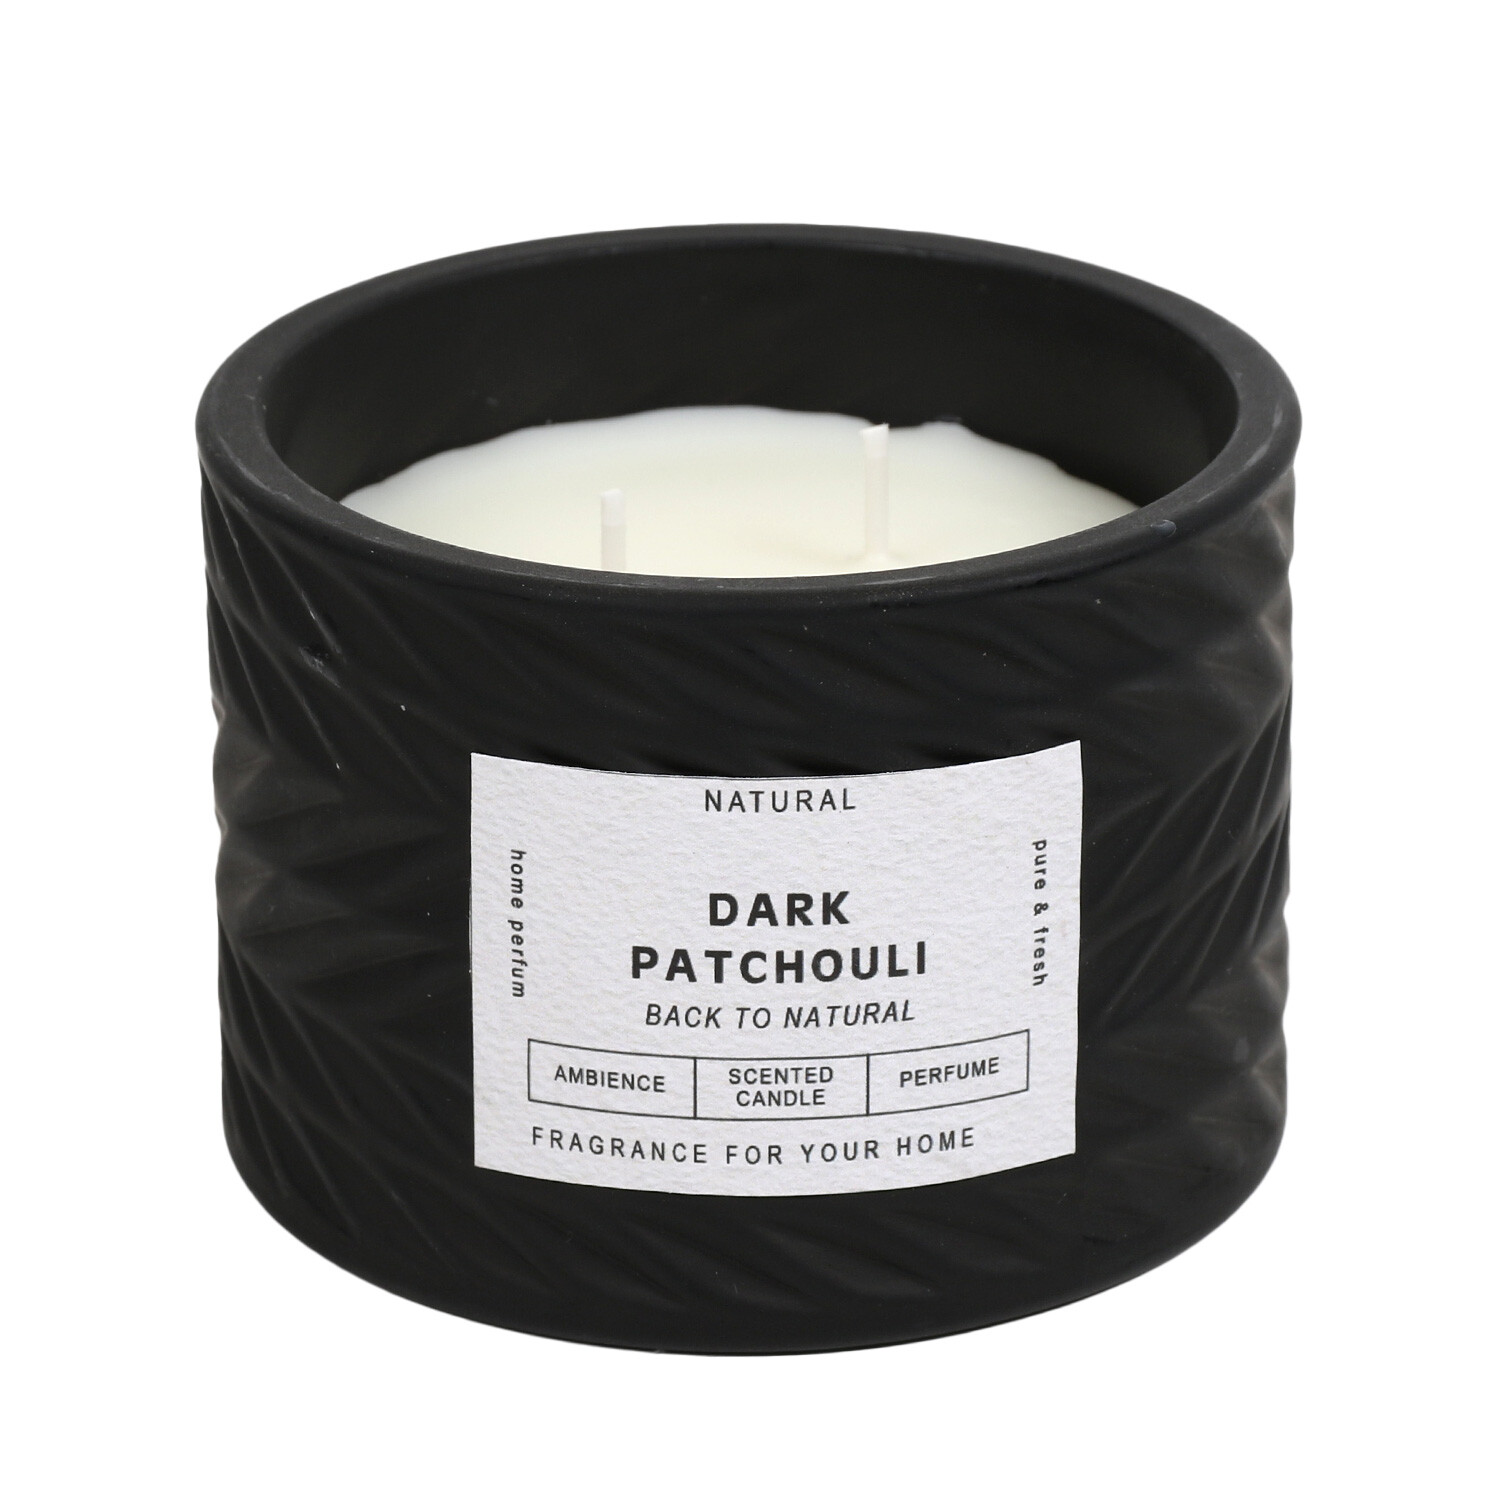 Single Natural Sanctuary Scented Candle in Assorted styles Image 3